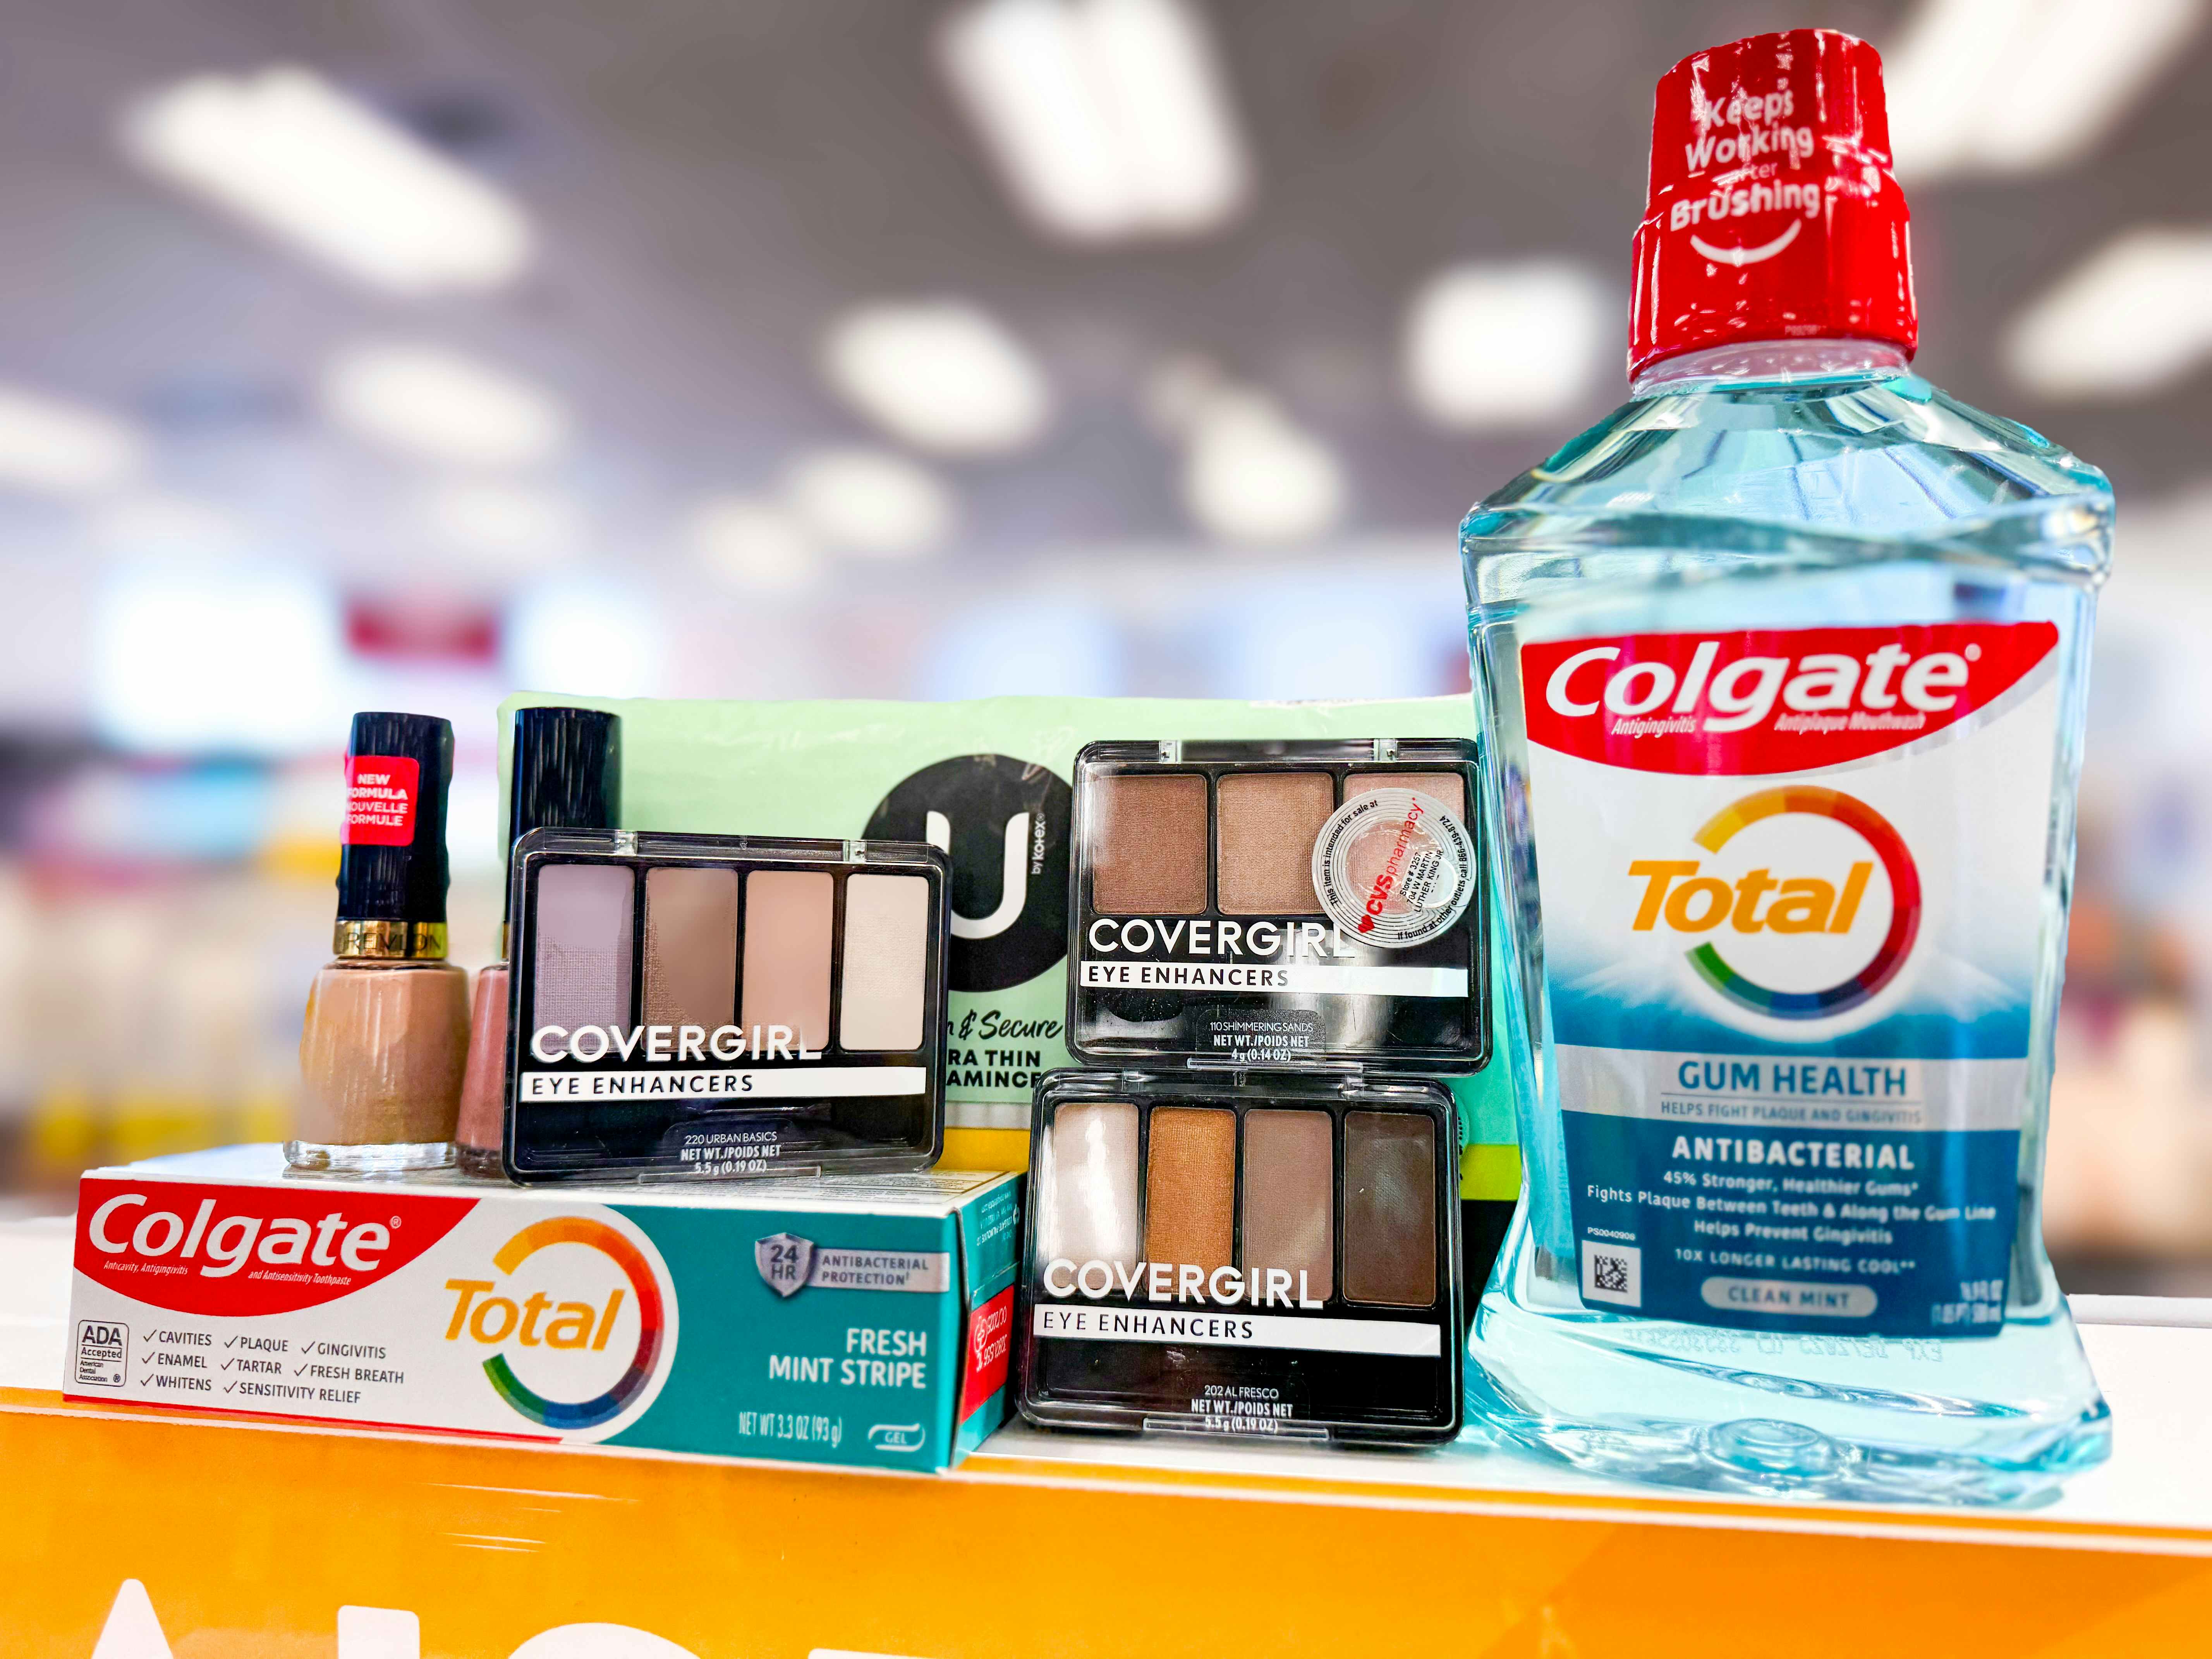 $42 Worth of Products for Free at CVS: Colgate, Revlon, Covergirl, and More